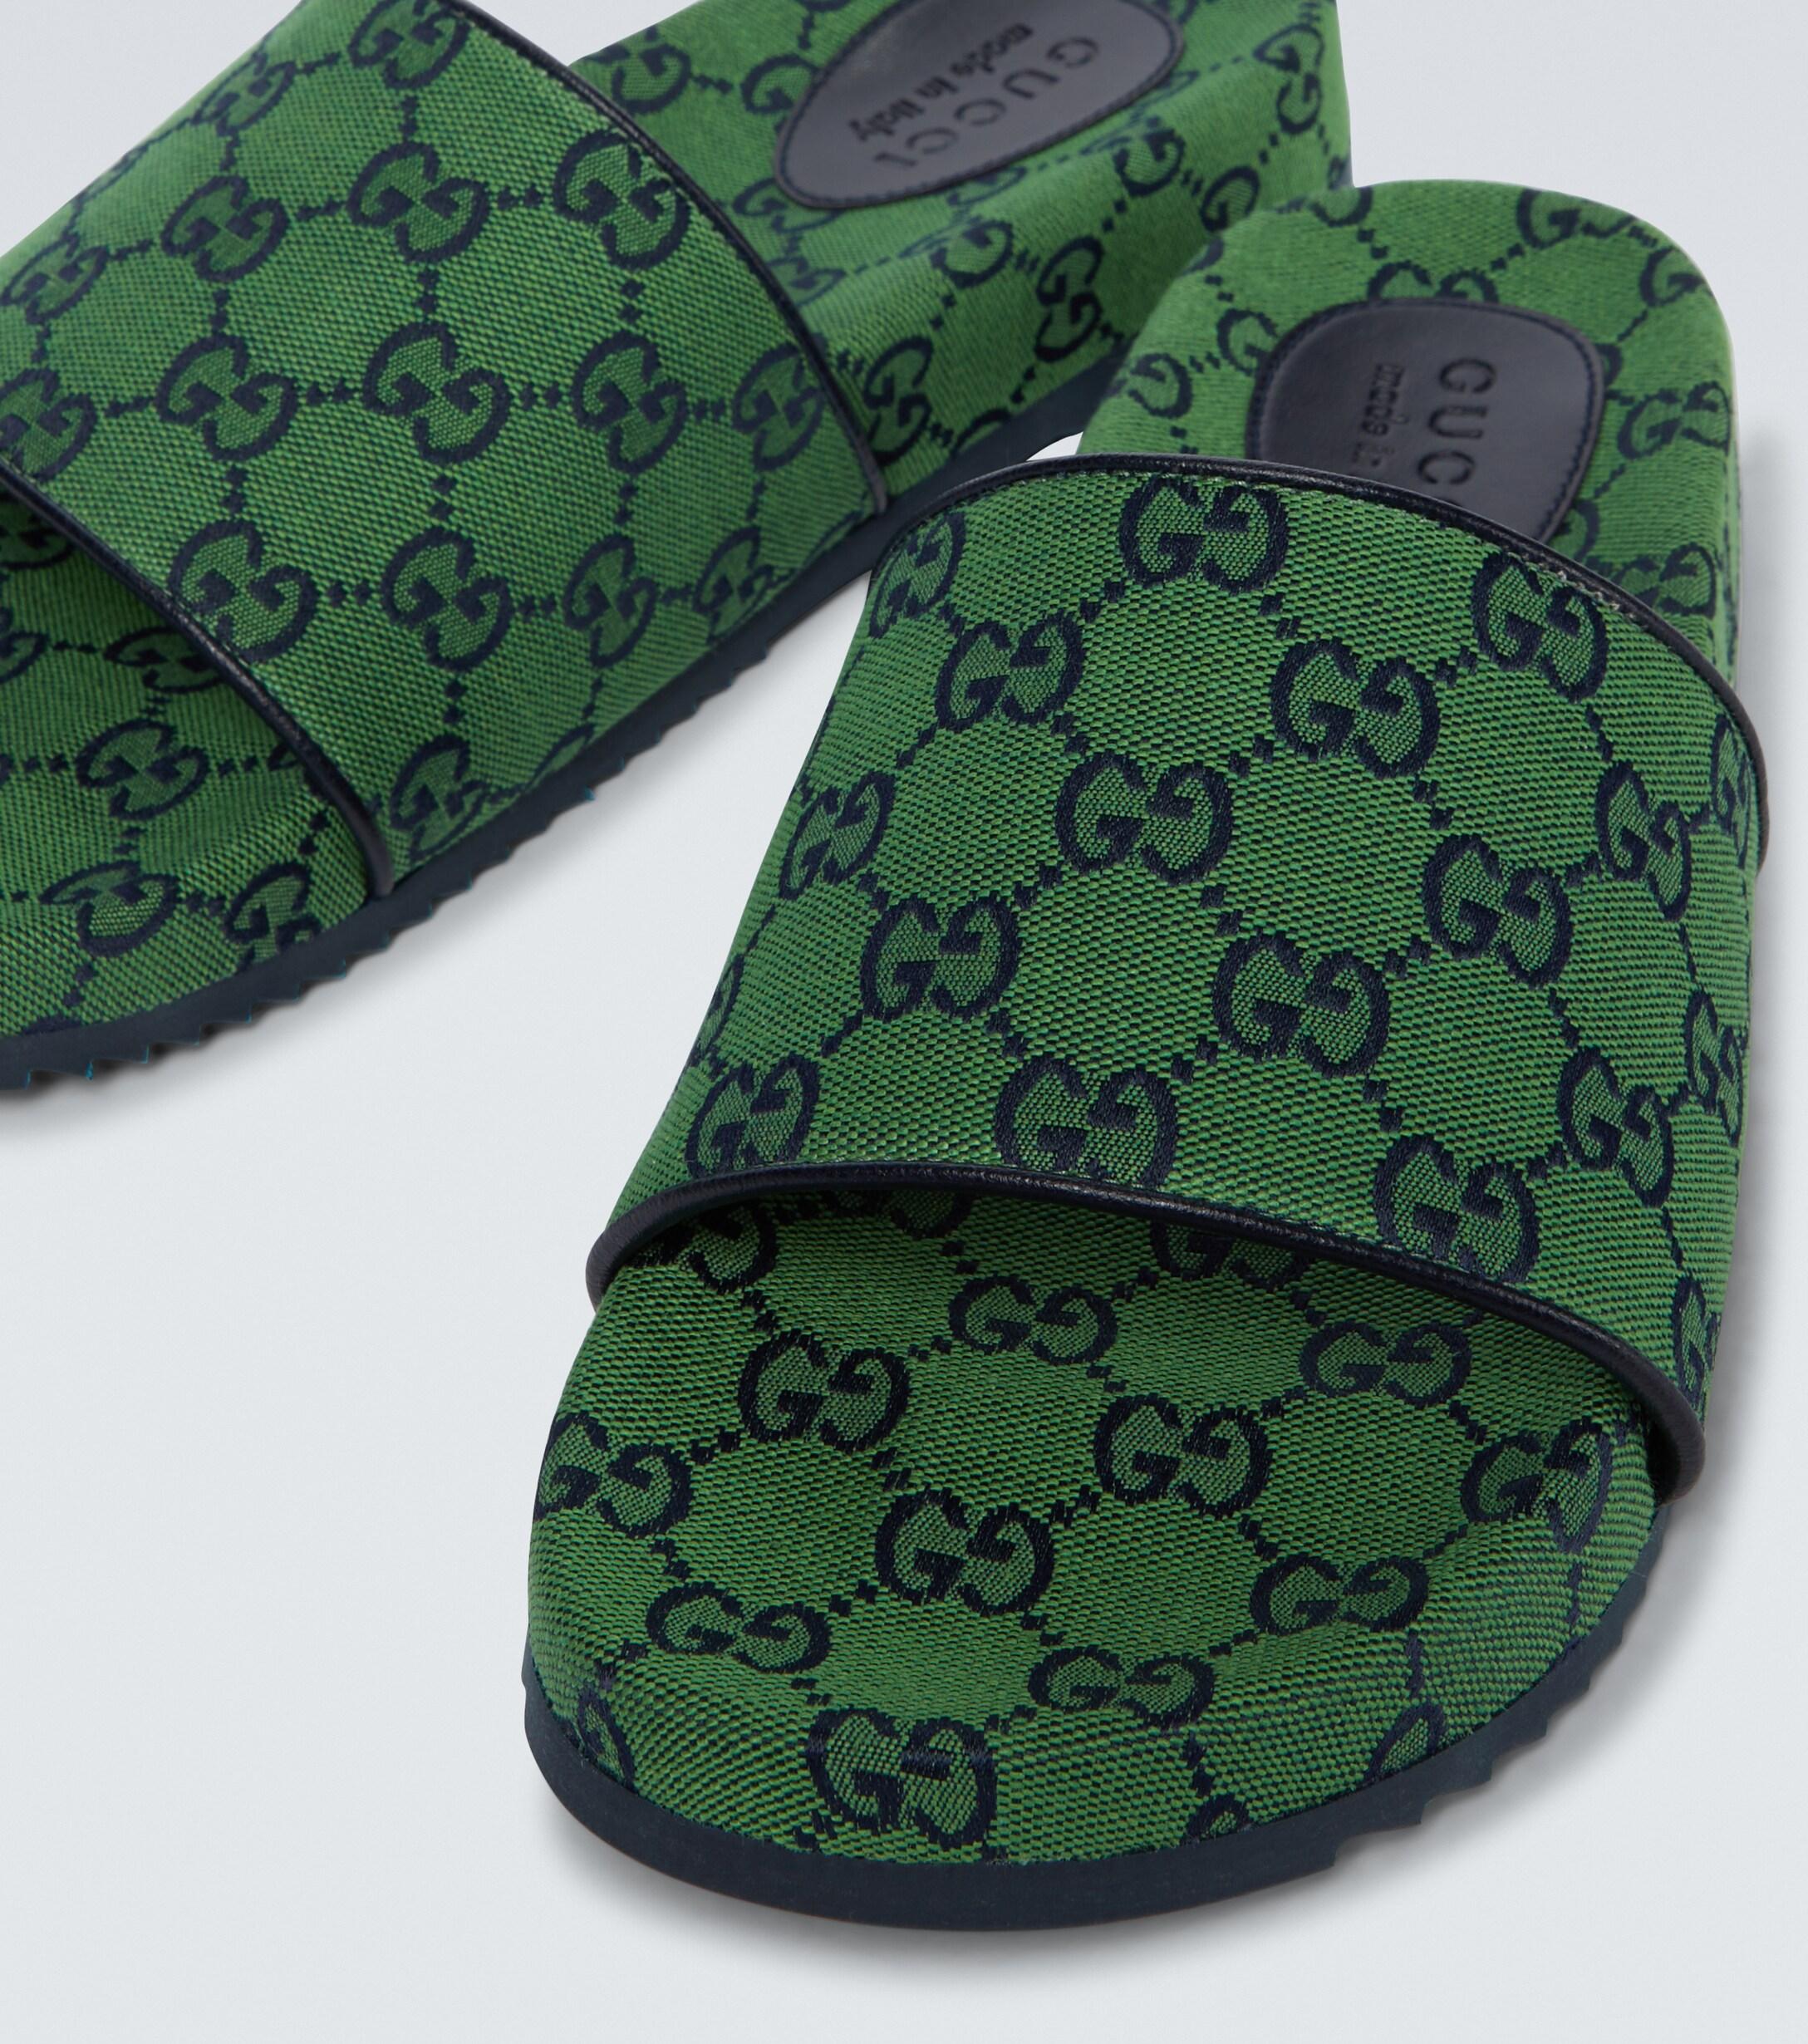 Gucci Canvas GG Multicolor Slides in Green for Men - Lyst